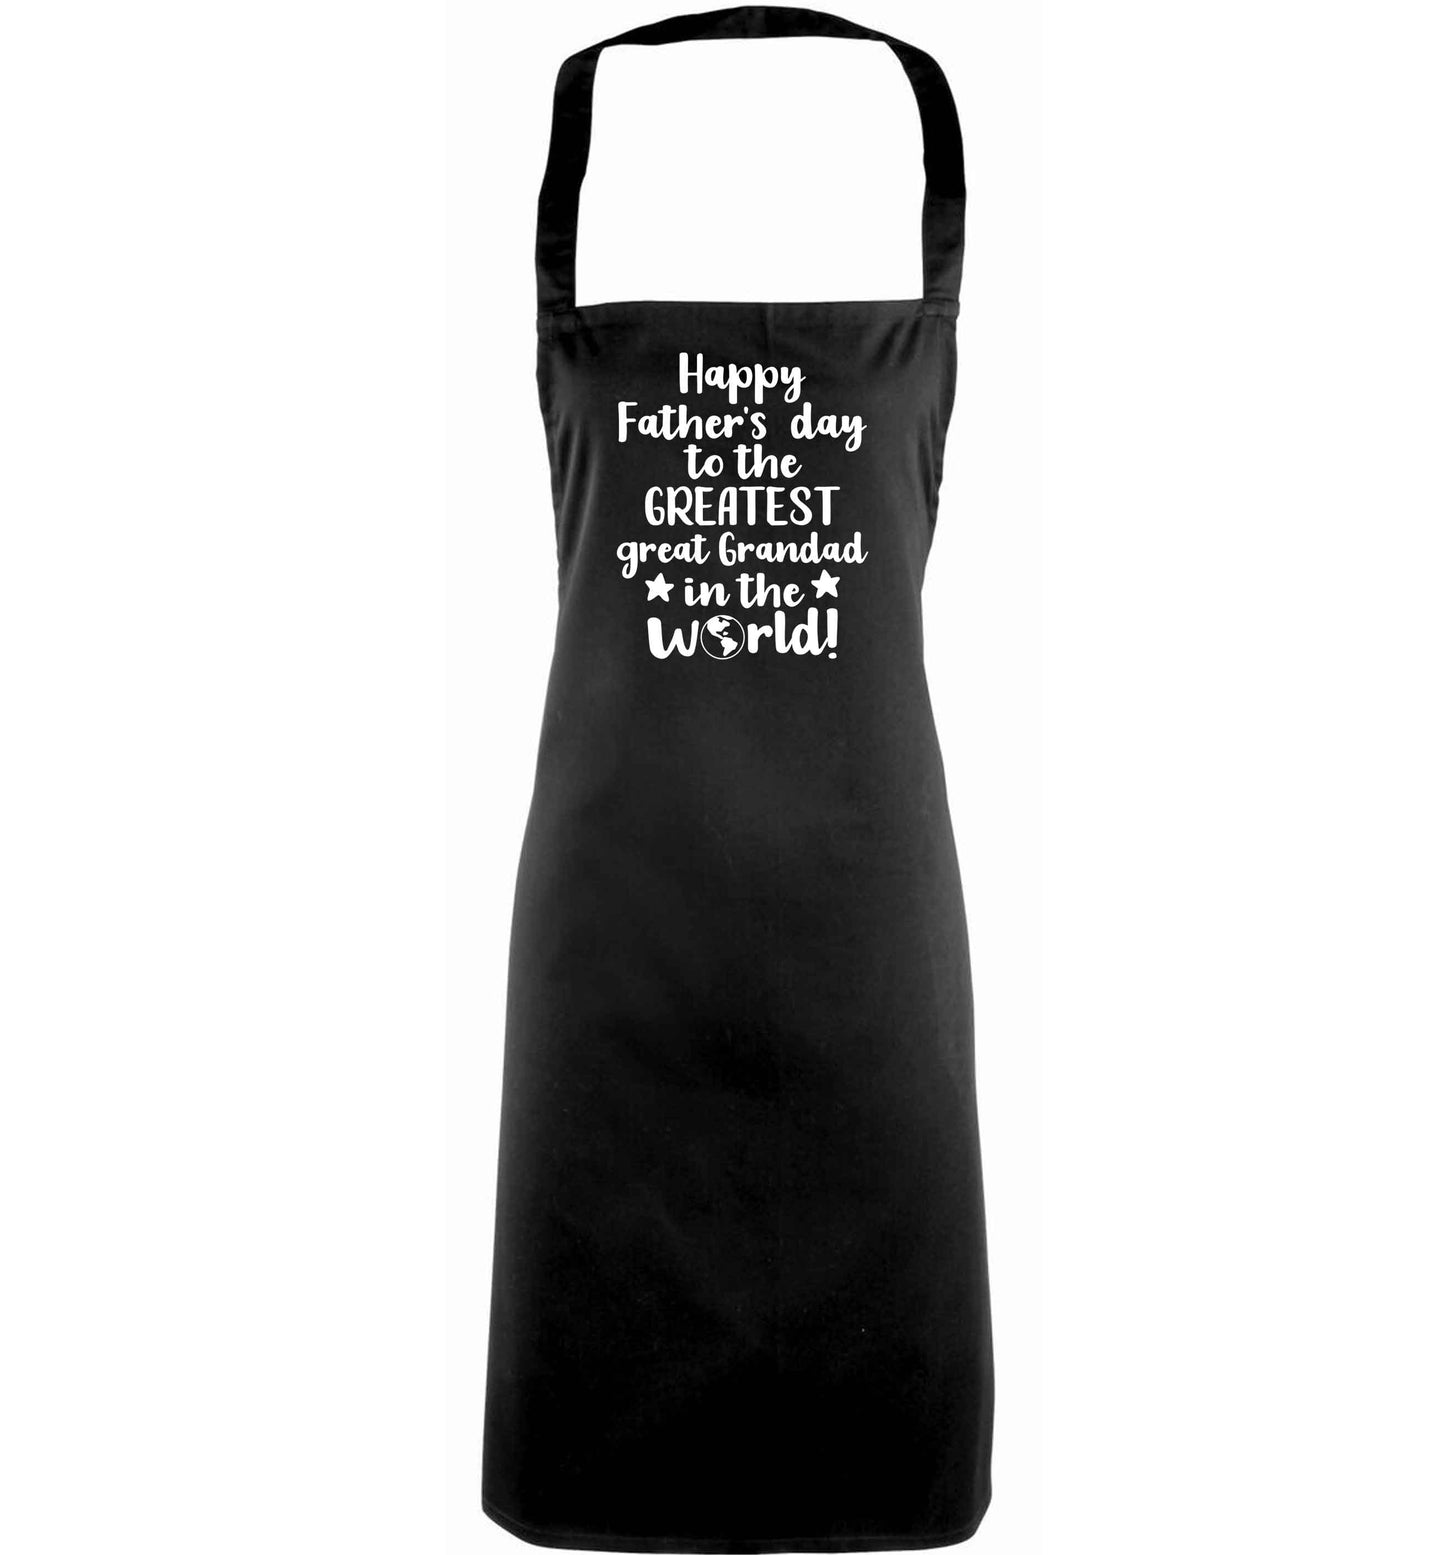 Happy Father's day to the greatest great grandad in the world adults black apron